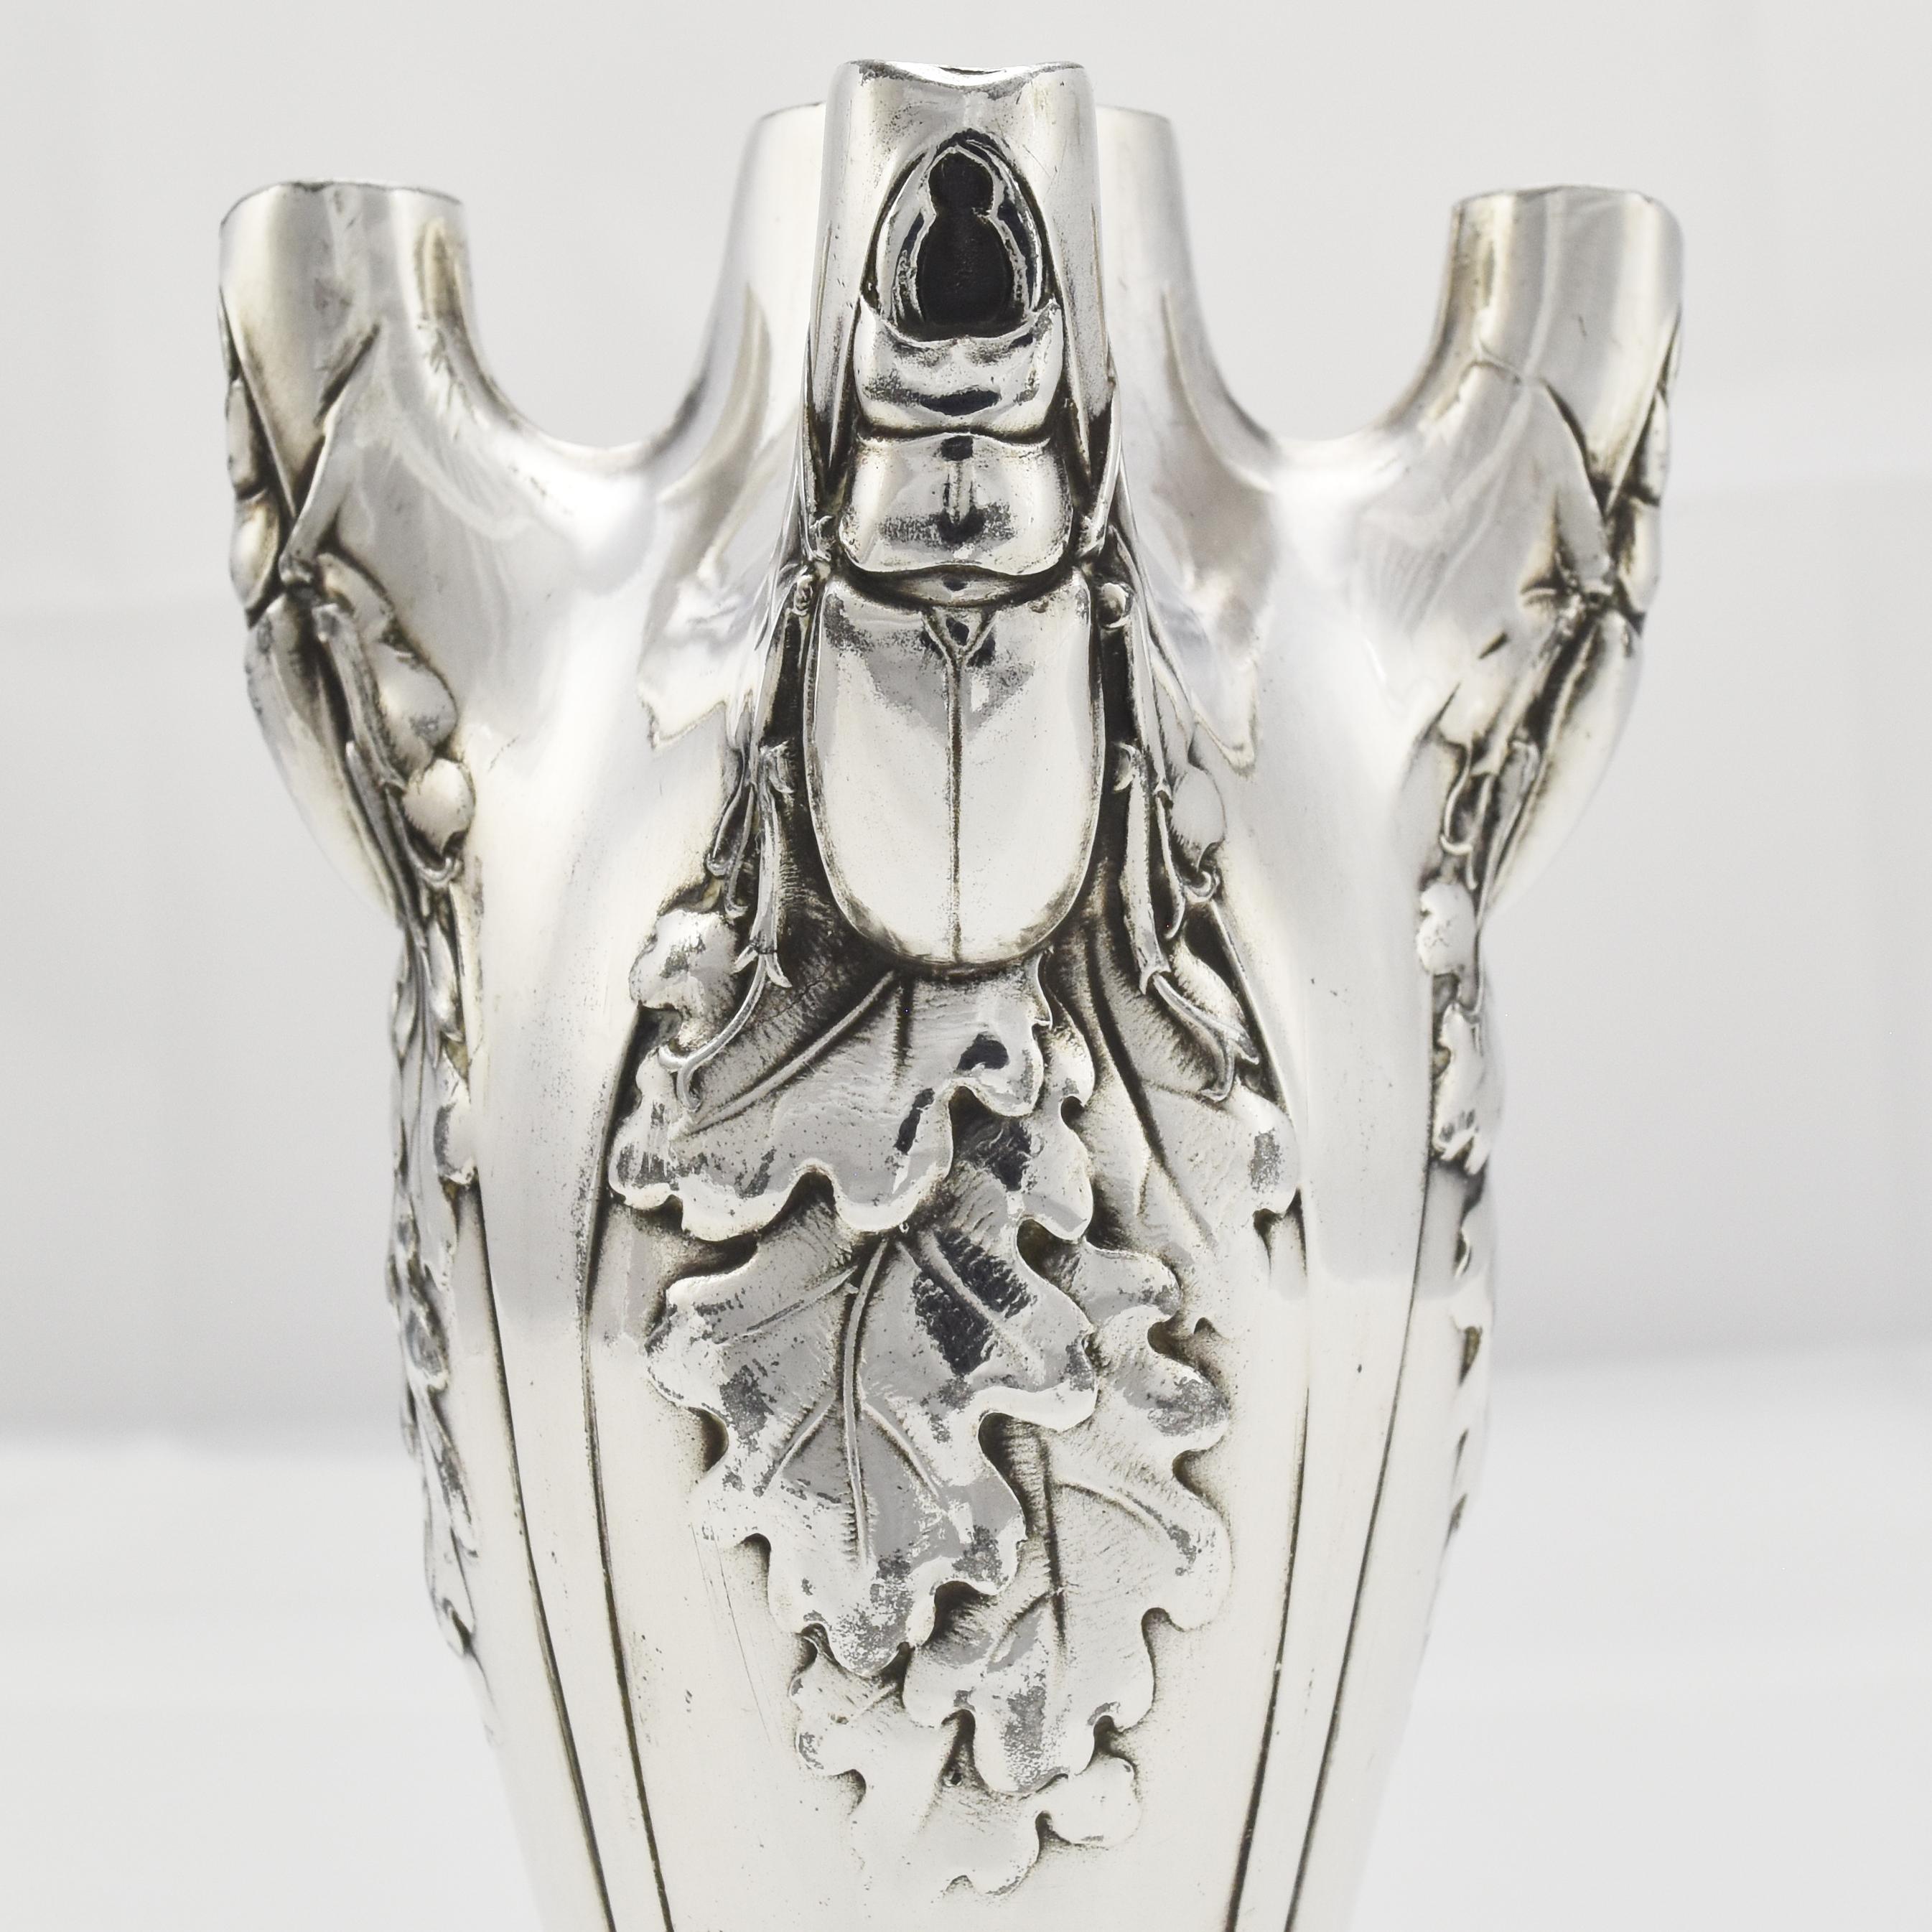 Early 20th Century Art Nouveau Vase with Stag Beetles by Christofle Gallia Paris For Sale